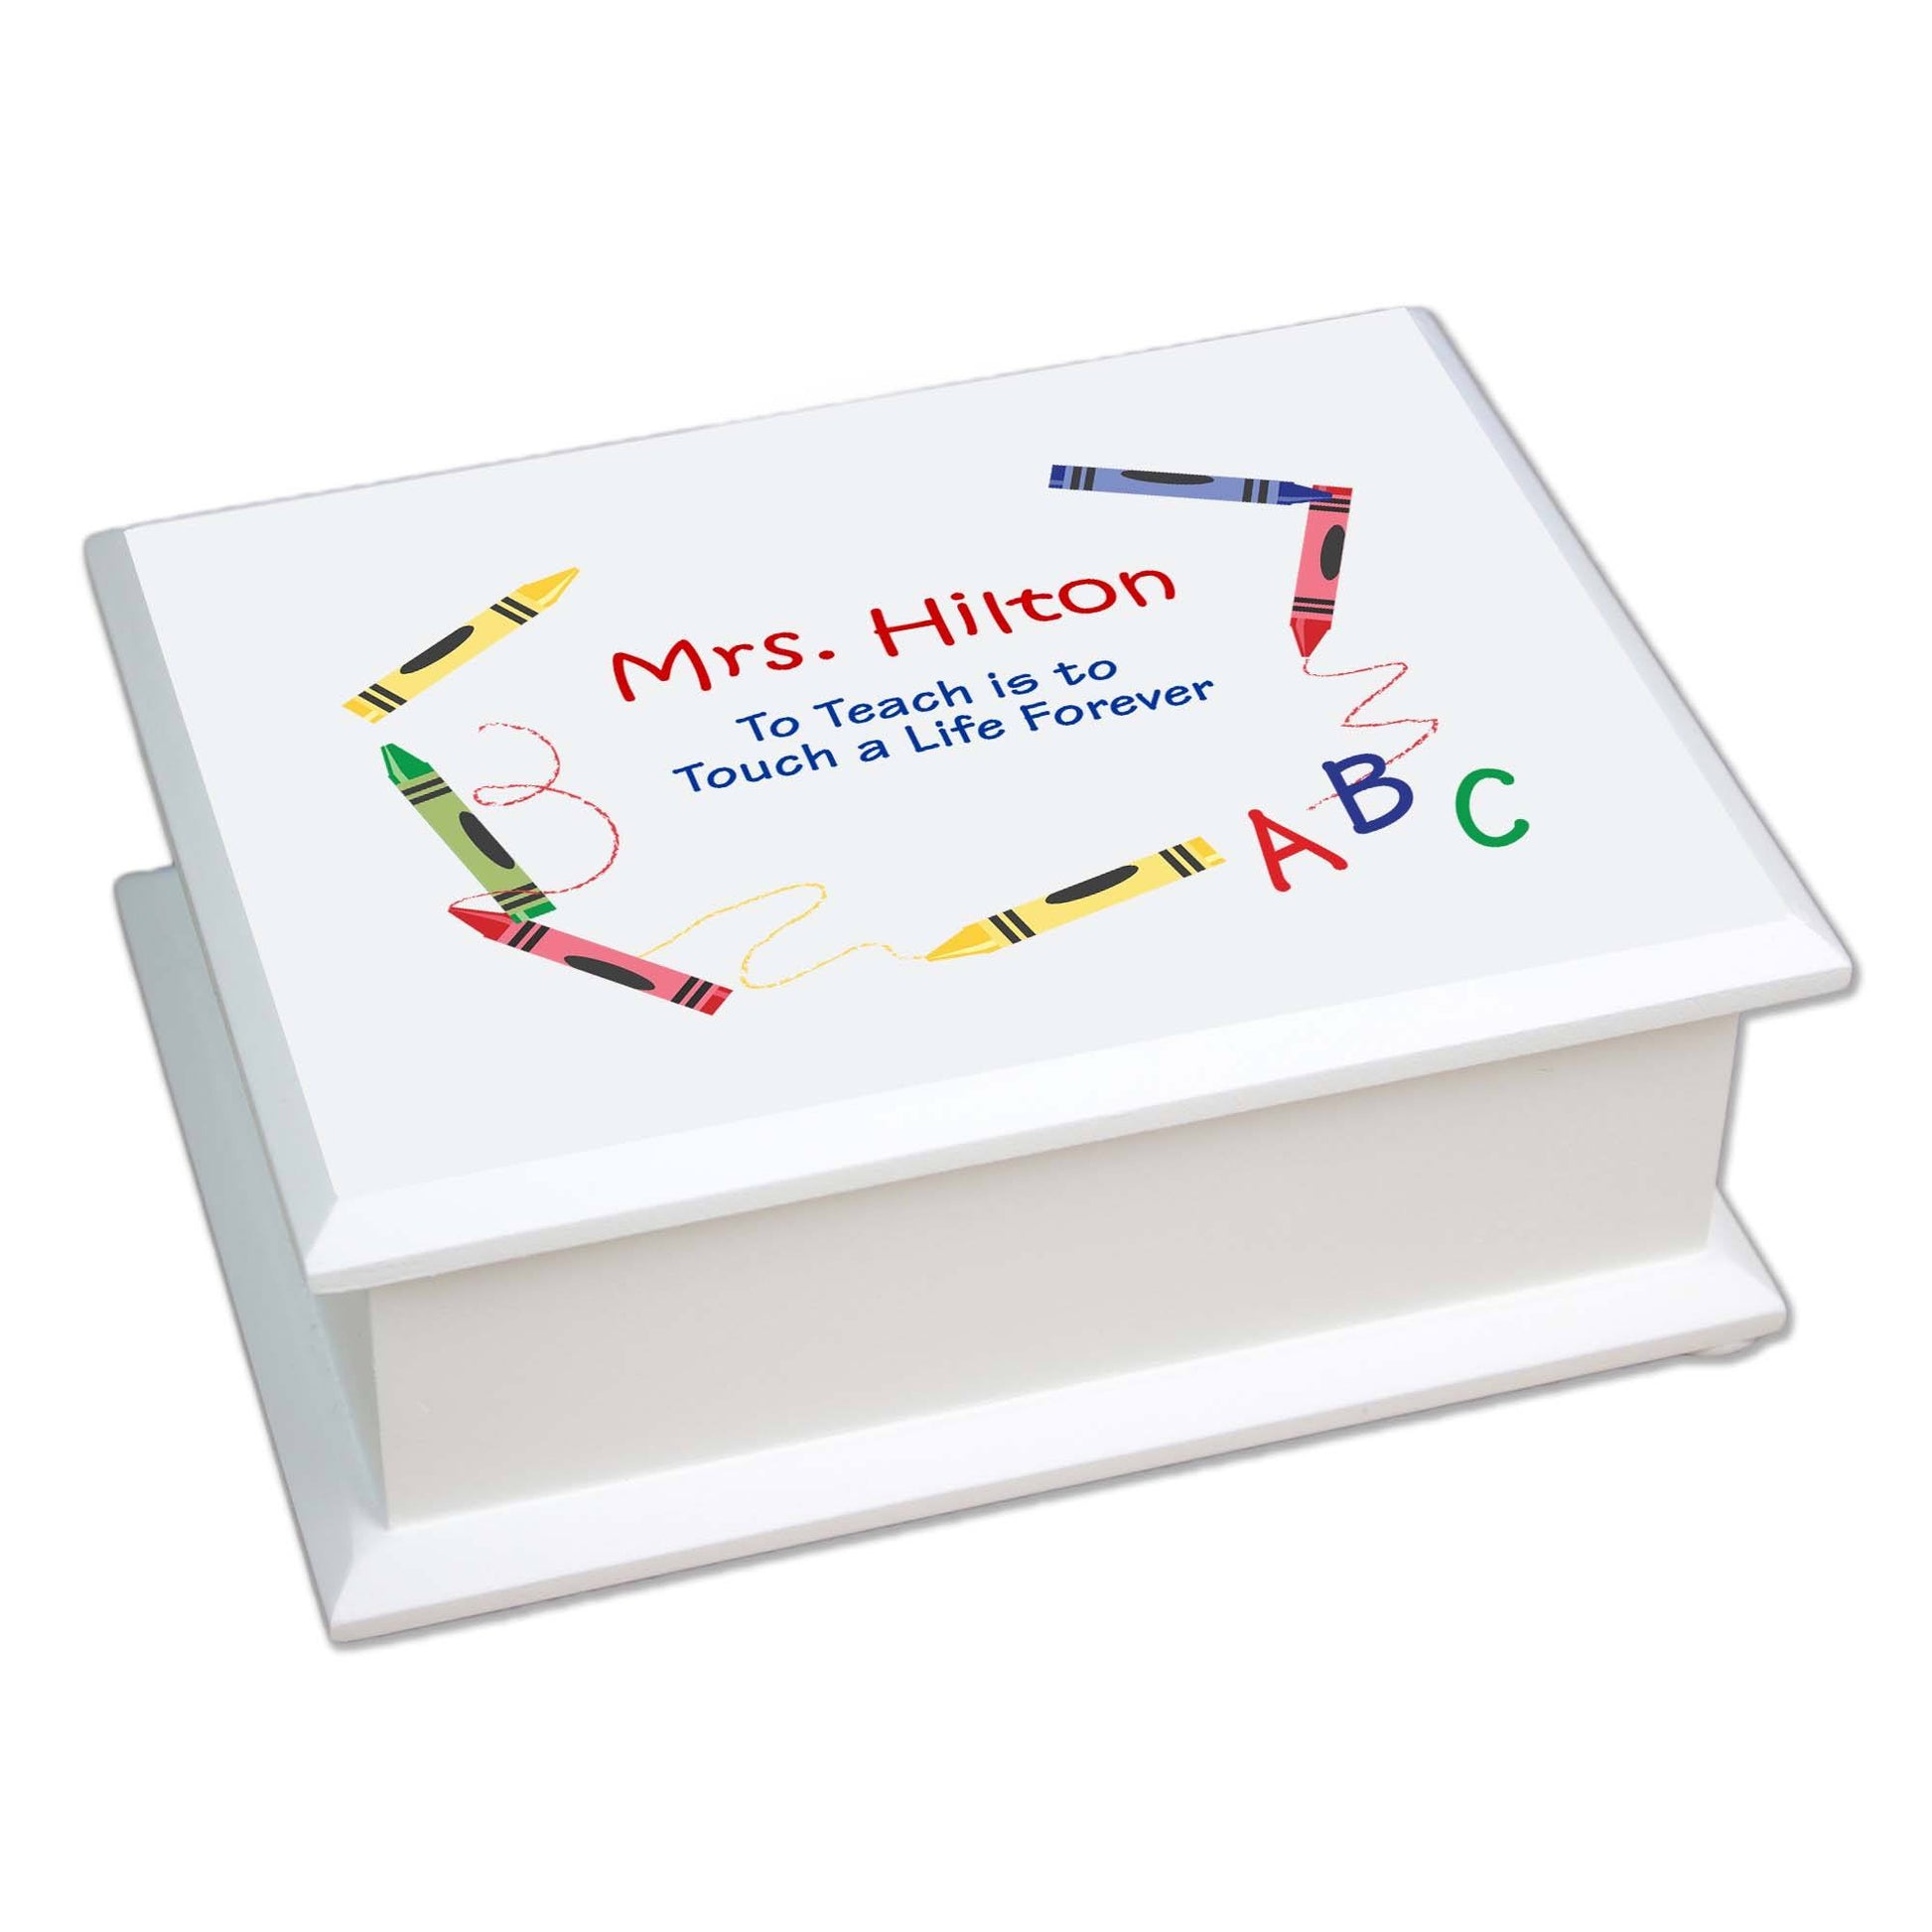 Personalized Lift Top Jewelry Box with Crayon design